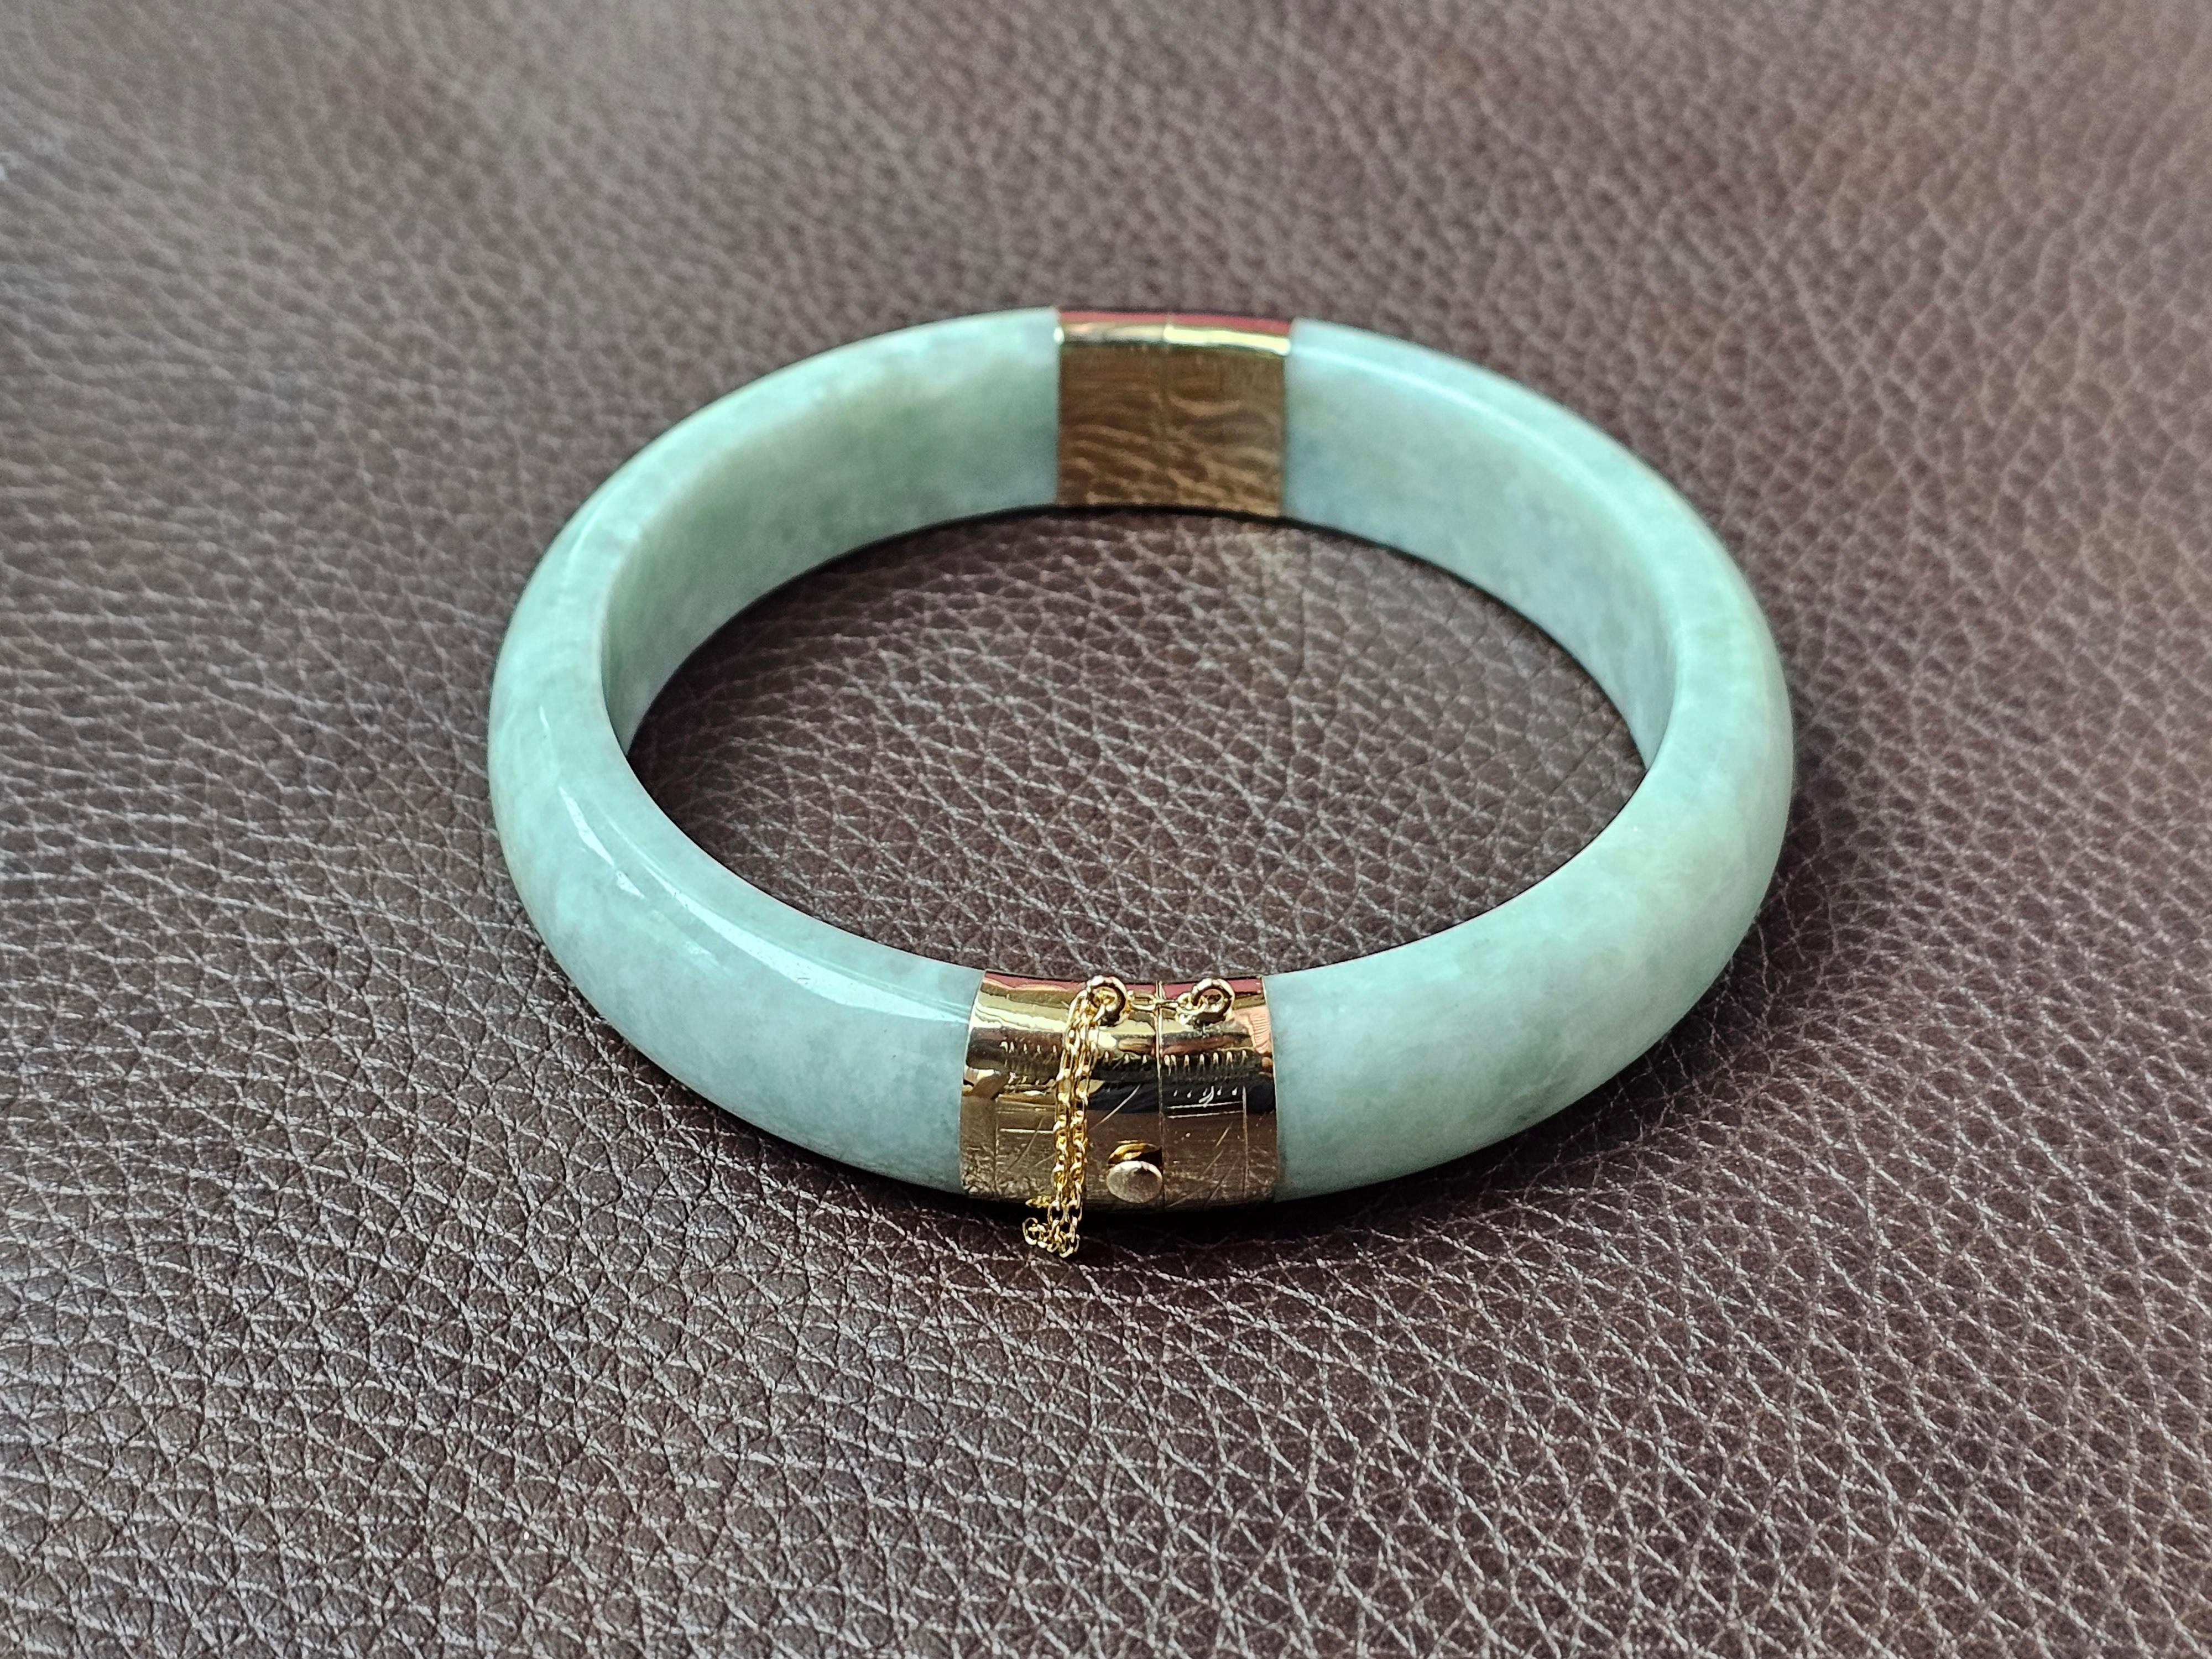 Using the best Handpicked untreated natural Jadeite from Burma, we created an authoritative and classy statement bangle bracelet. The 'Viceroy's Circular Burmese Jade Bangle Bracelet' accentuates the Gold and Jade Elements by displaying perfect